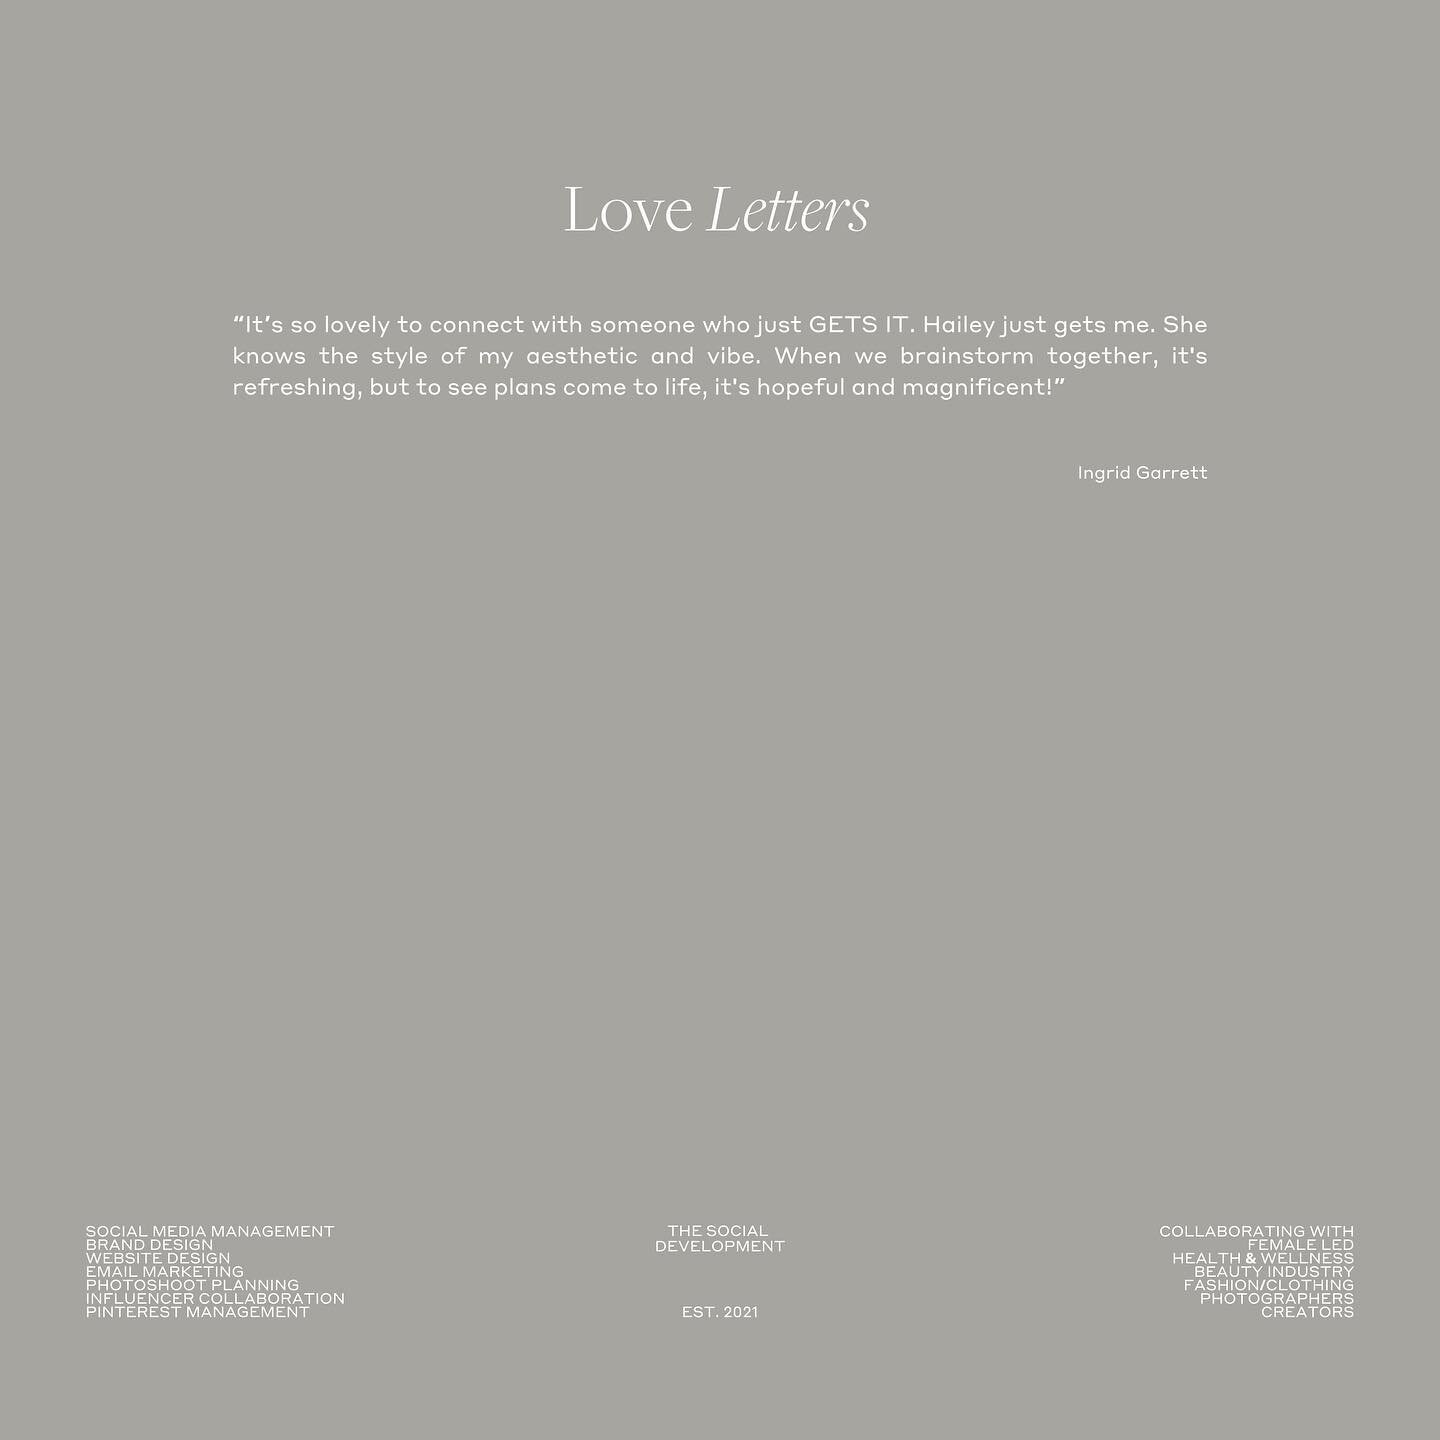 〰️ love letters 〰️

from one of my favorite bad ass business owners I&rsquo;ve ever collaborated with &mdash; Ingrid Garrett.

owner of @omnibeautistudio 〰️

we&rsquo;ve collaborated on:
+ SMM
+ Brand Design
+ Website Design

we&rsquo;ve pretty much 